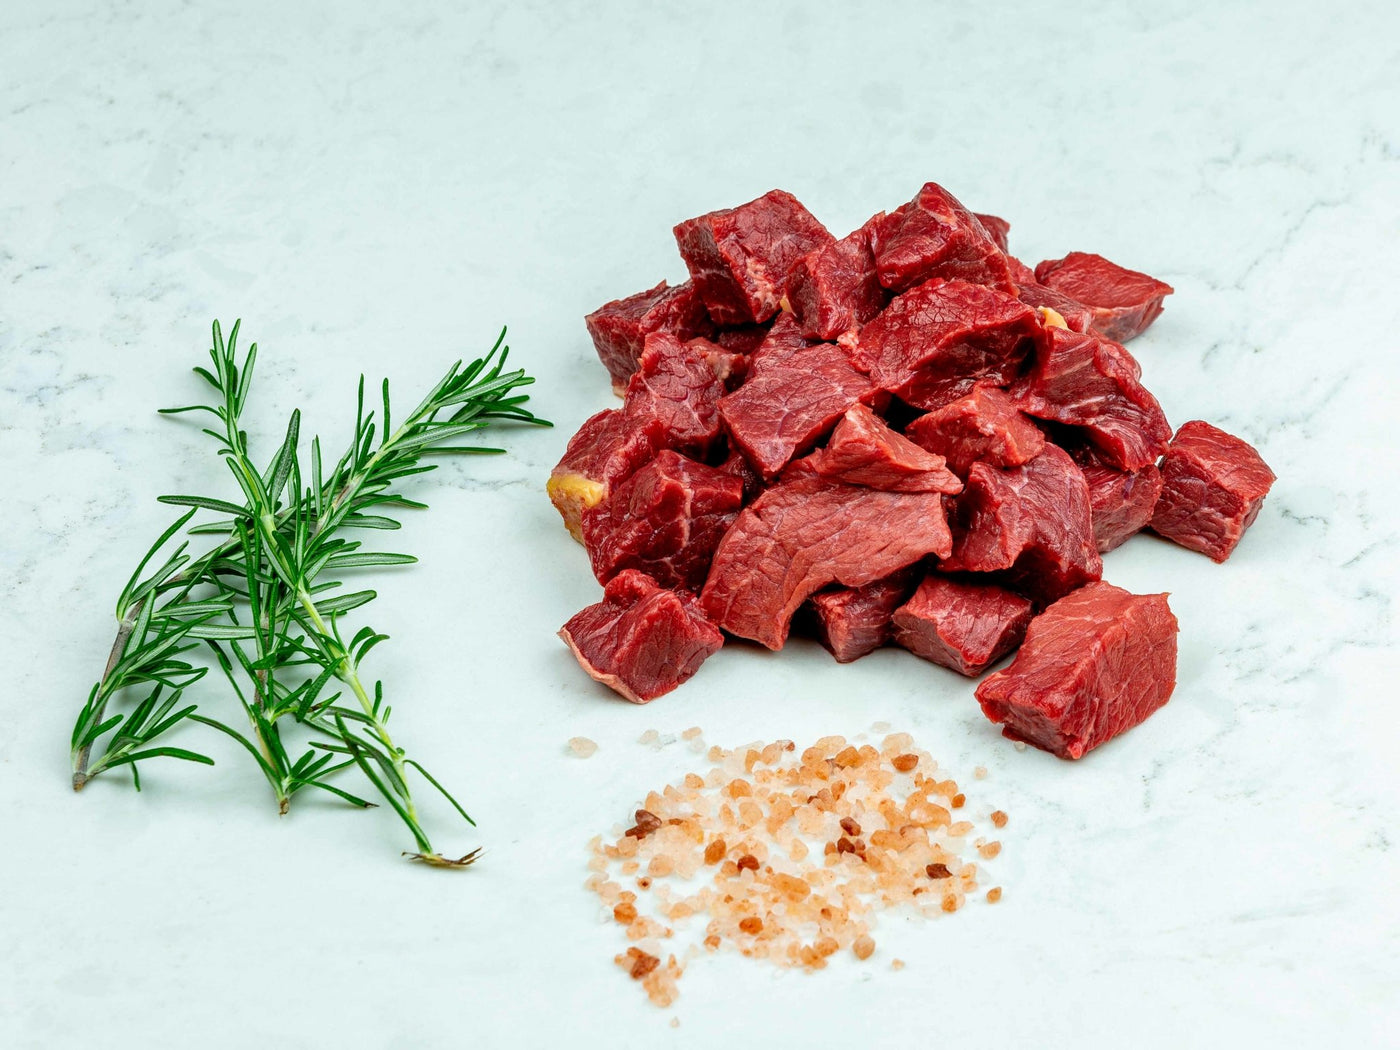 Grass Fed, Dry Aged Diced Beef - Beef - Thomas Joseph Butchery - Ethical Dry-Aged Meat The Best Steak UK Thomas Joseph Butchery